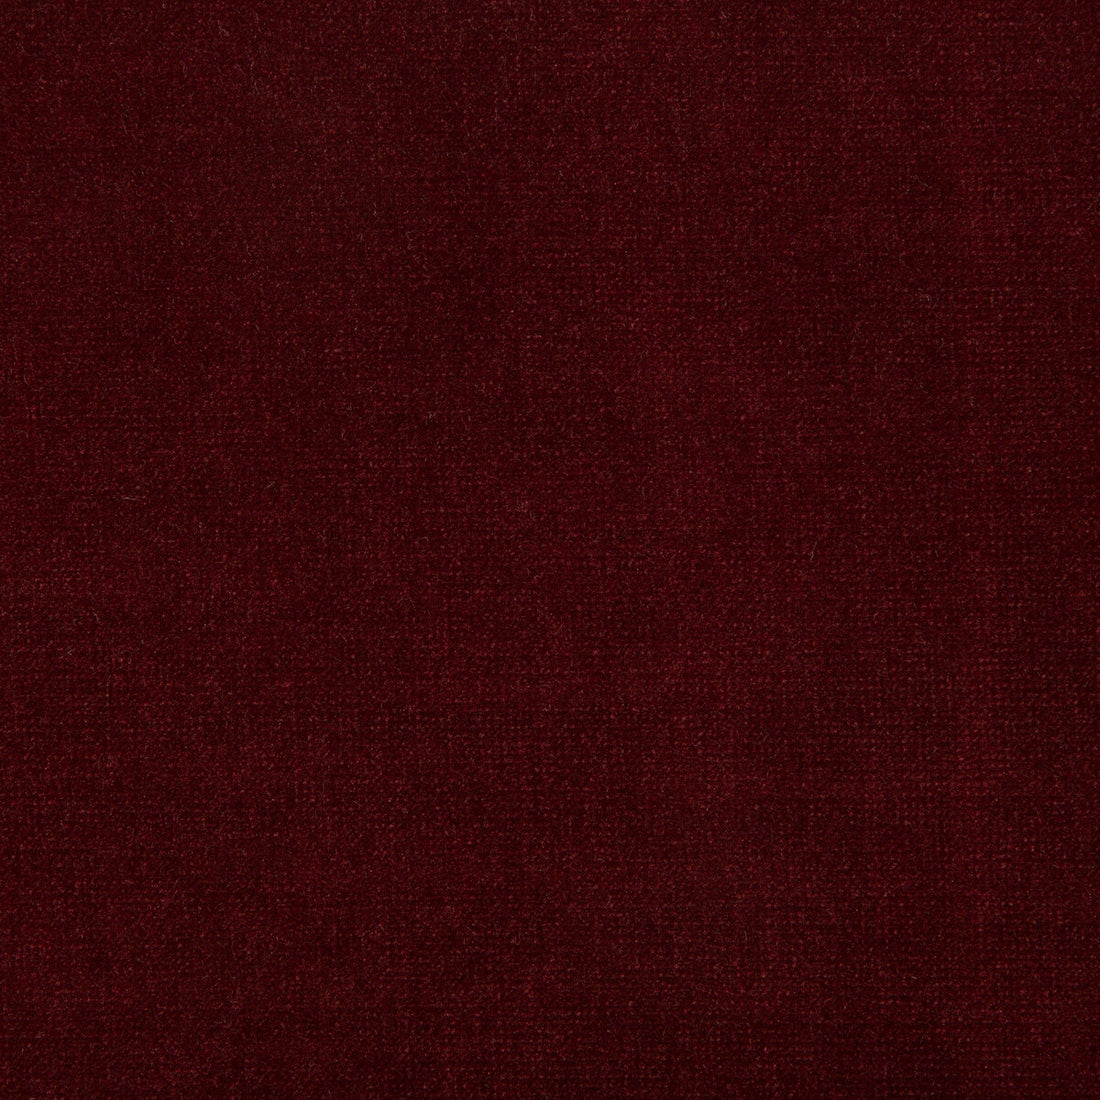 Chessford fabric in maroon color - pattern 35360.9.0 - by Kravet Smart in the Performance collection